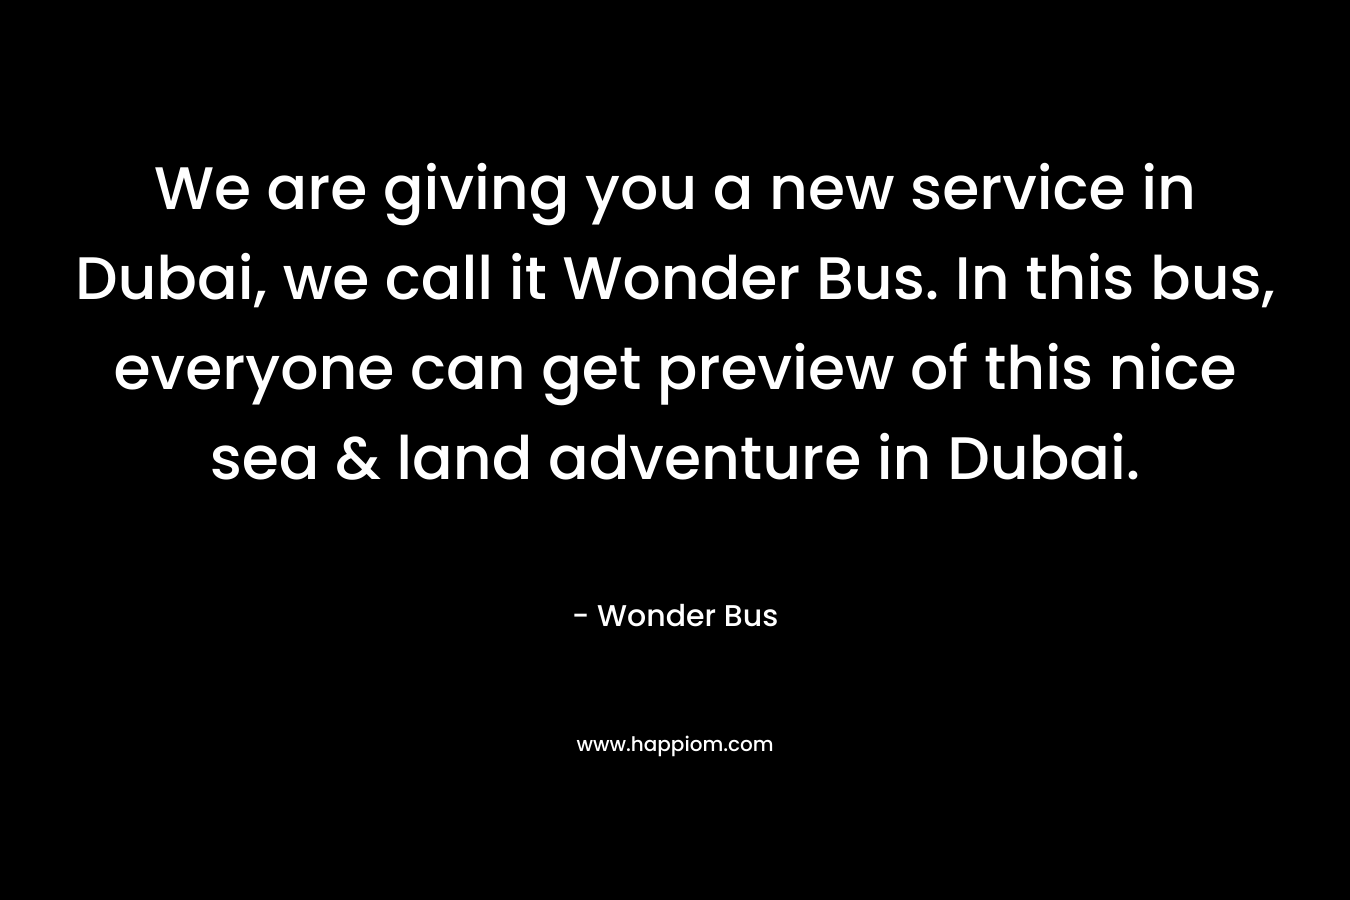 We are giving you a new service in Dubai, we call it Wonder Bus. In this bus, everyone can get preview of this nice sea & land adventure in Dubai.